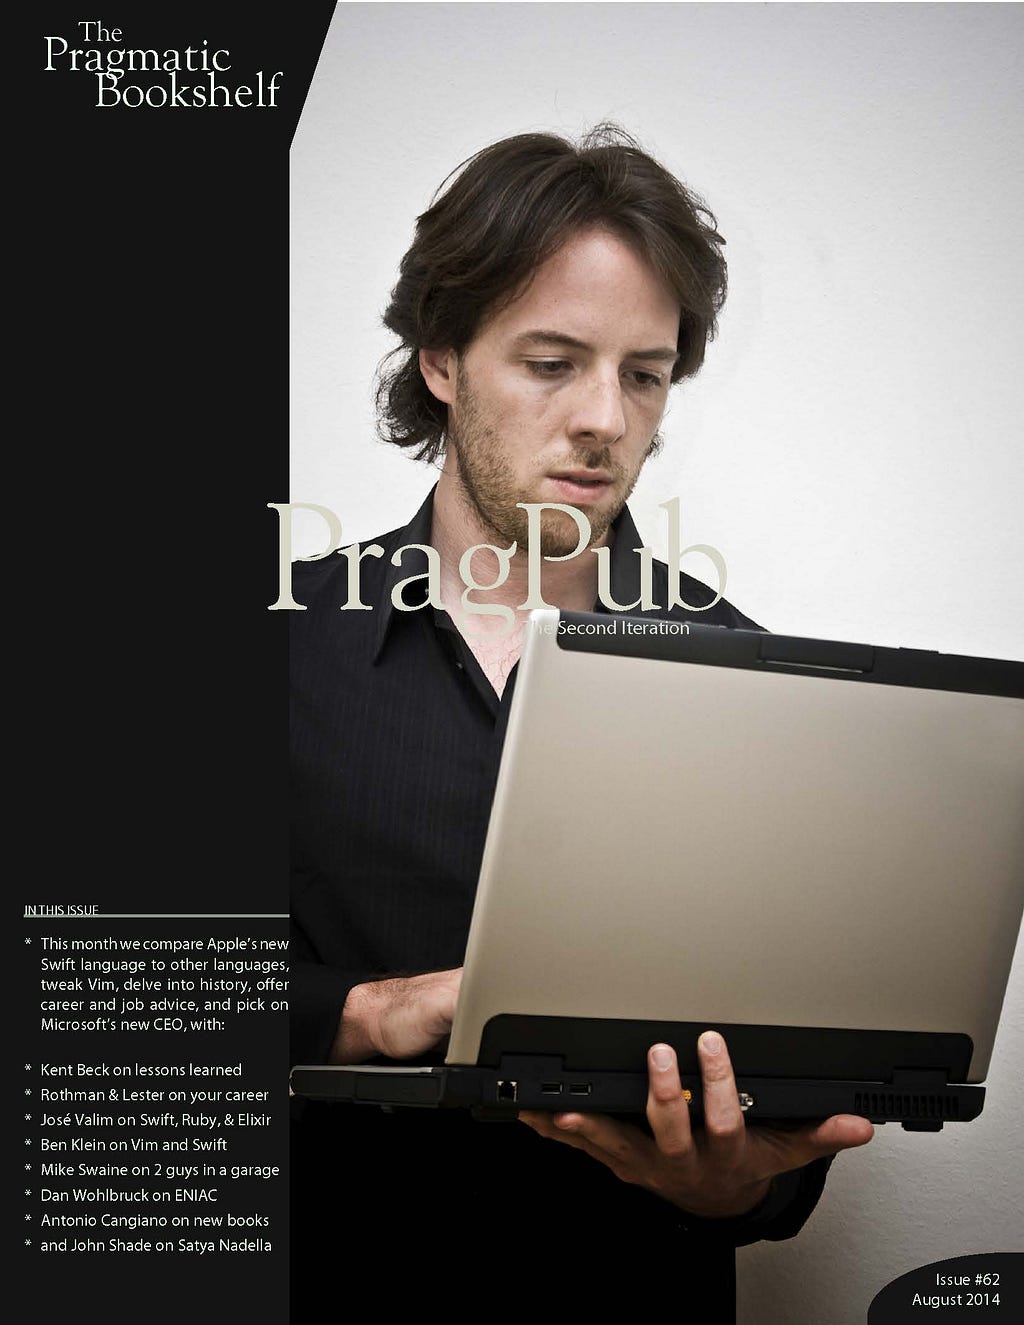 White male with brown hair looking down at a laptop